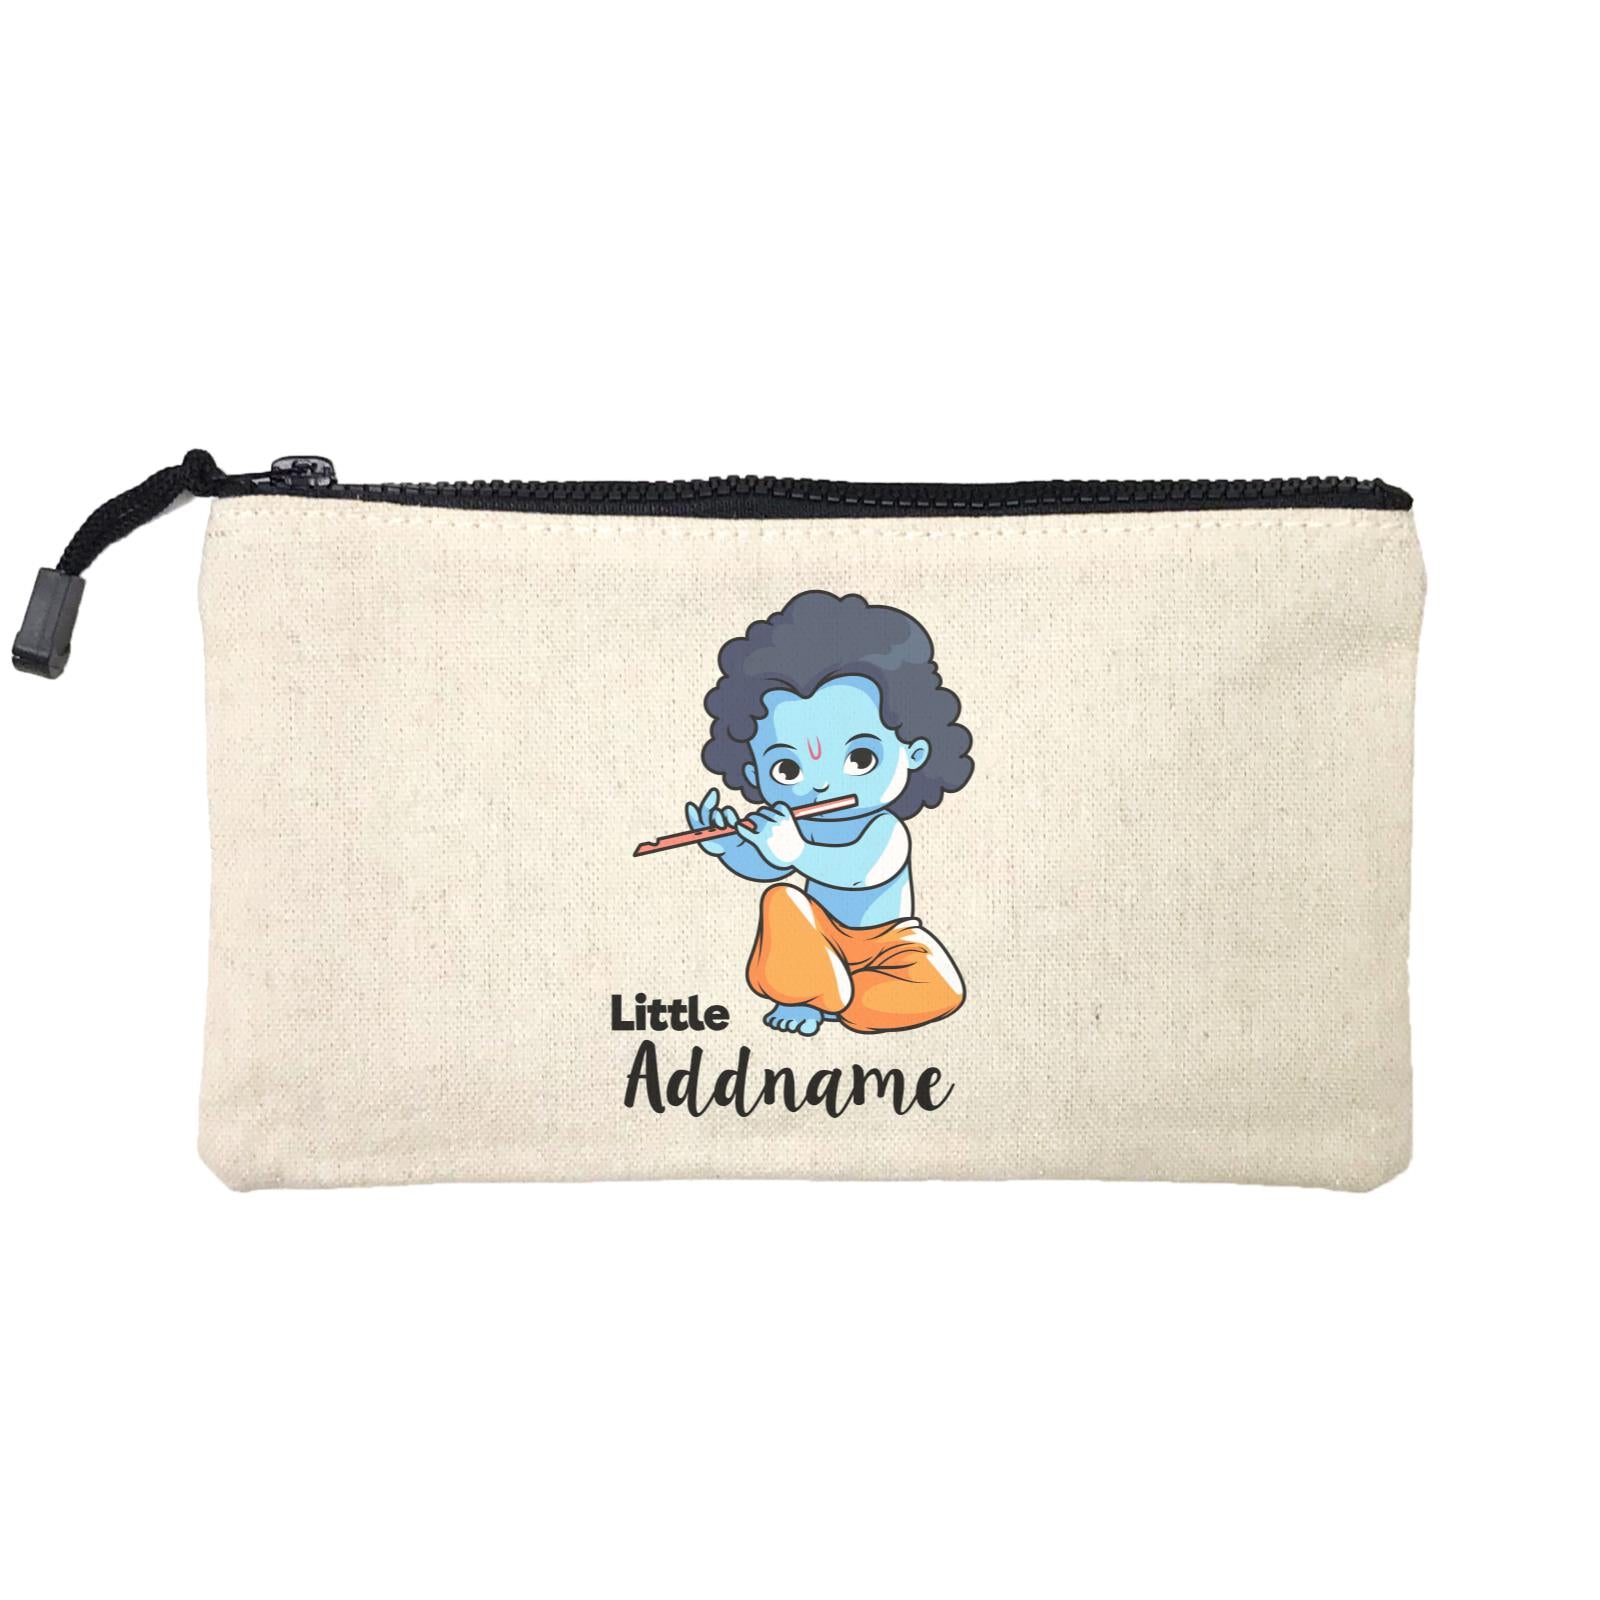 Cute Krishna Sitting Playing Flute Little Addname Mini Accessories Stationery Pouch